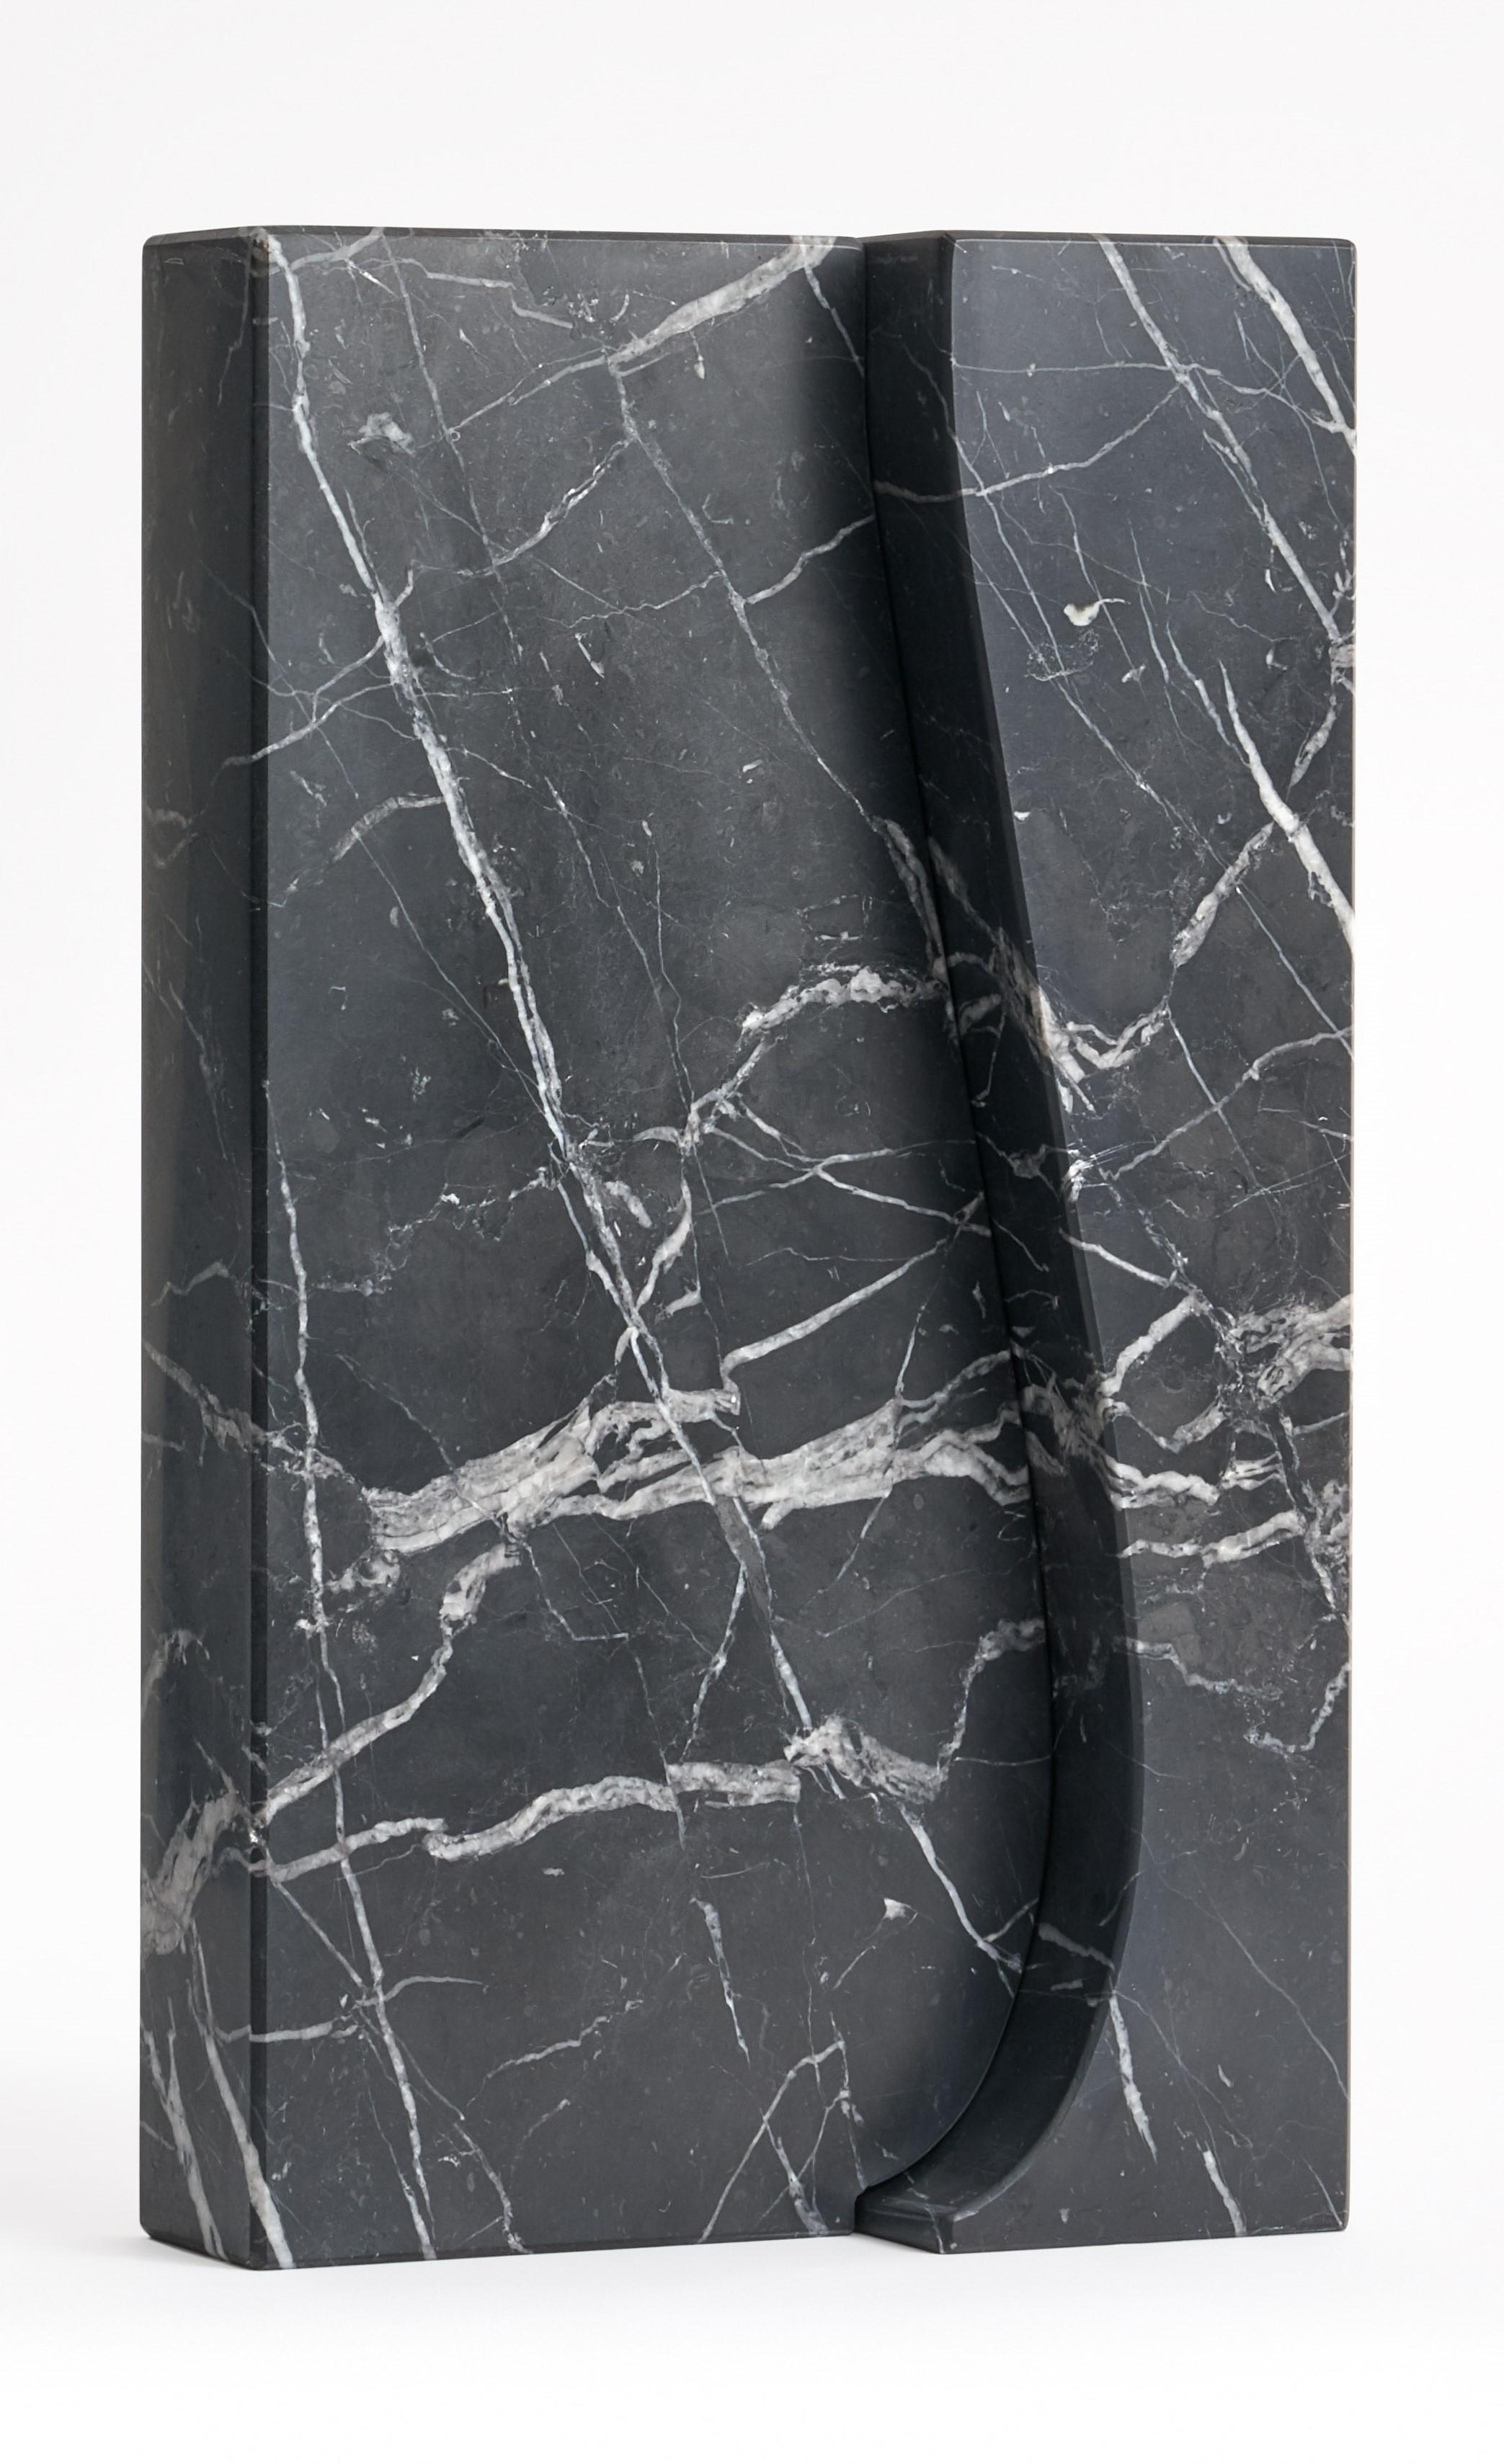 Big Recisi marble vase - Moreno Ratti
Dimensions: D 5 x W 20 x H 37 cm
Materials: Nero Marquina marble.
Available in other size and marble.

The memory of a children's game, like play with simple shape cut on paper.
The magic of the discovery